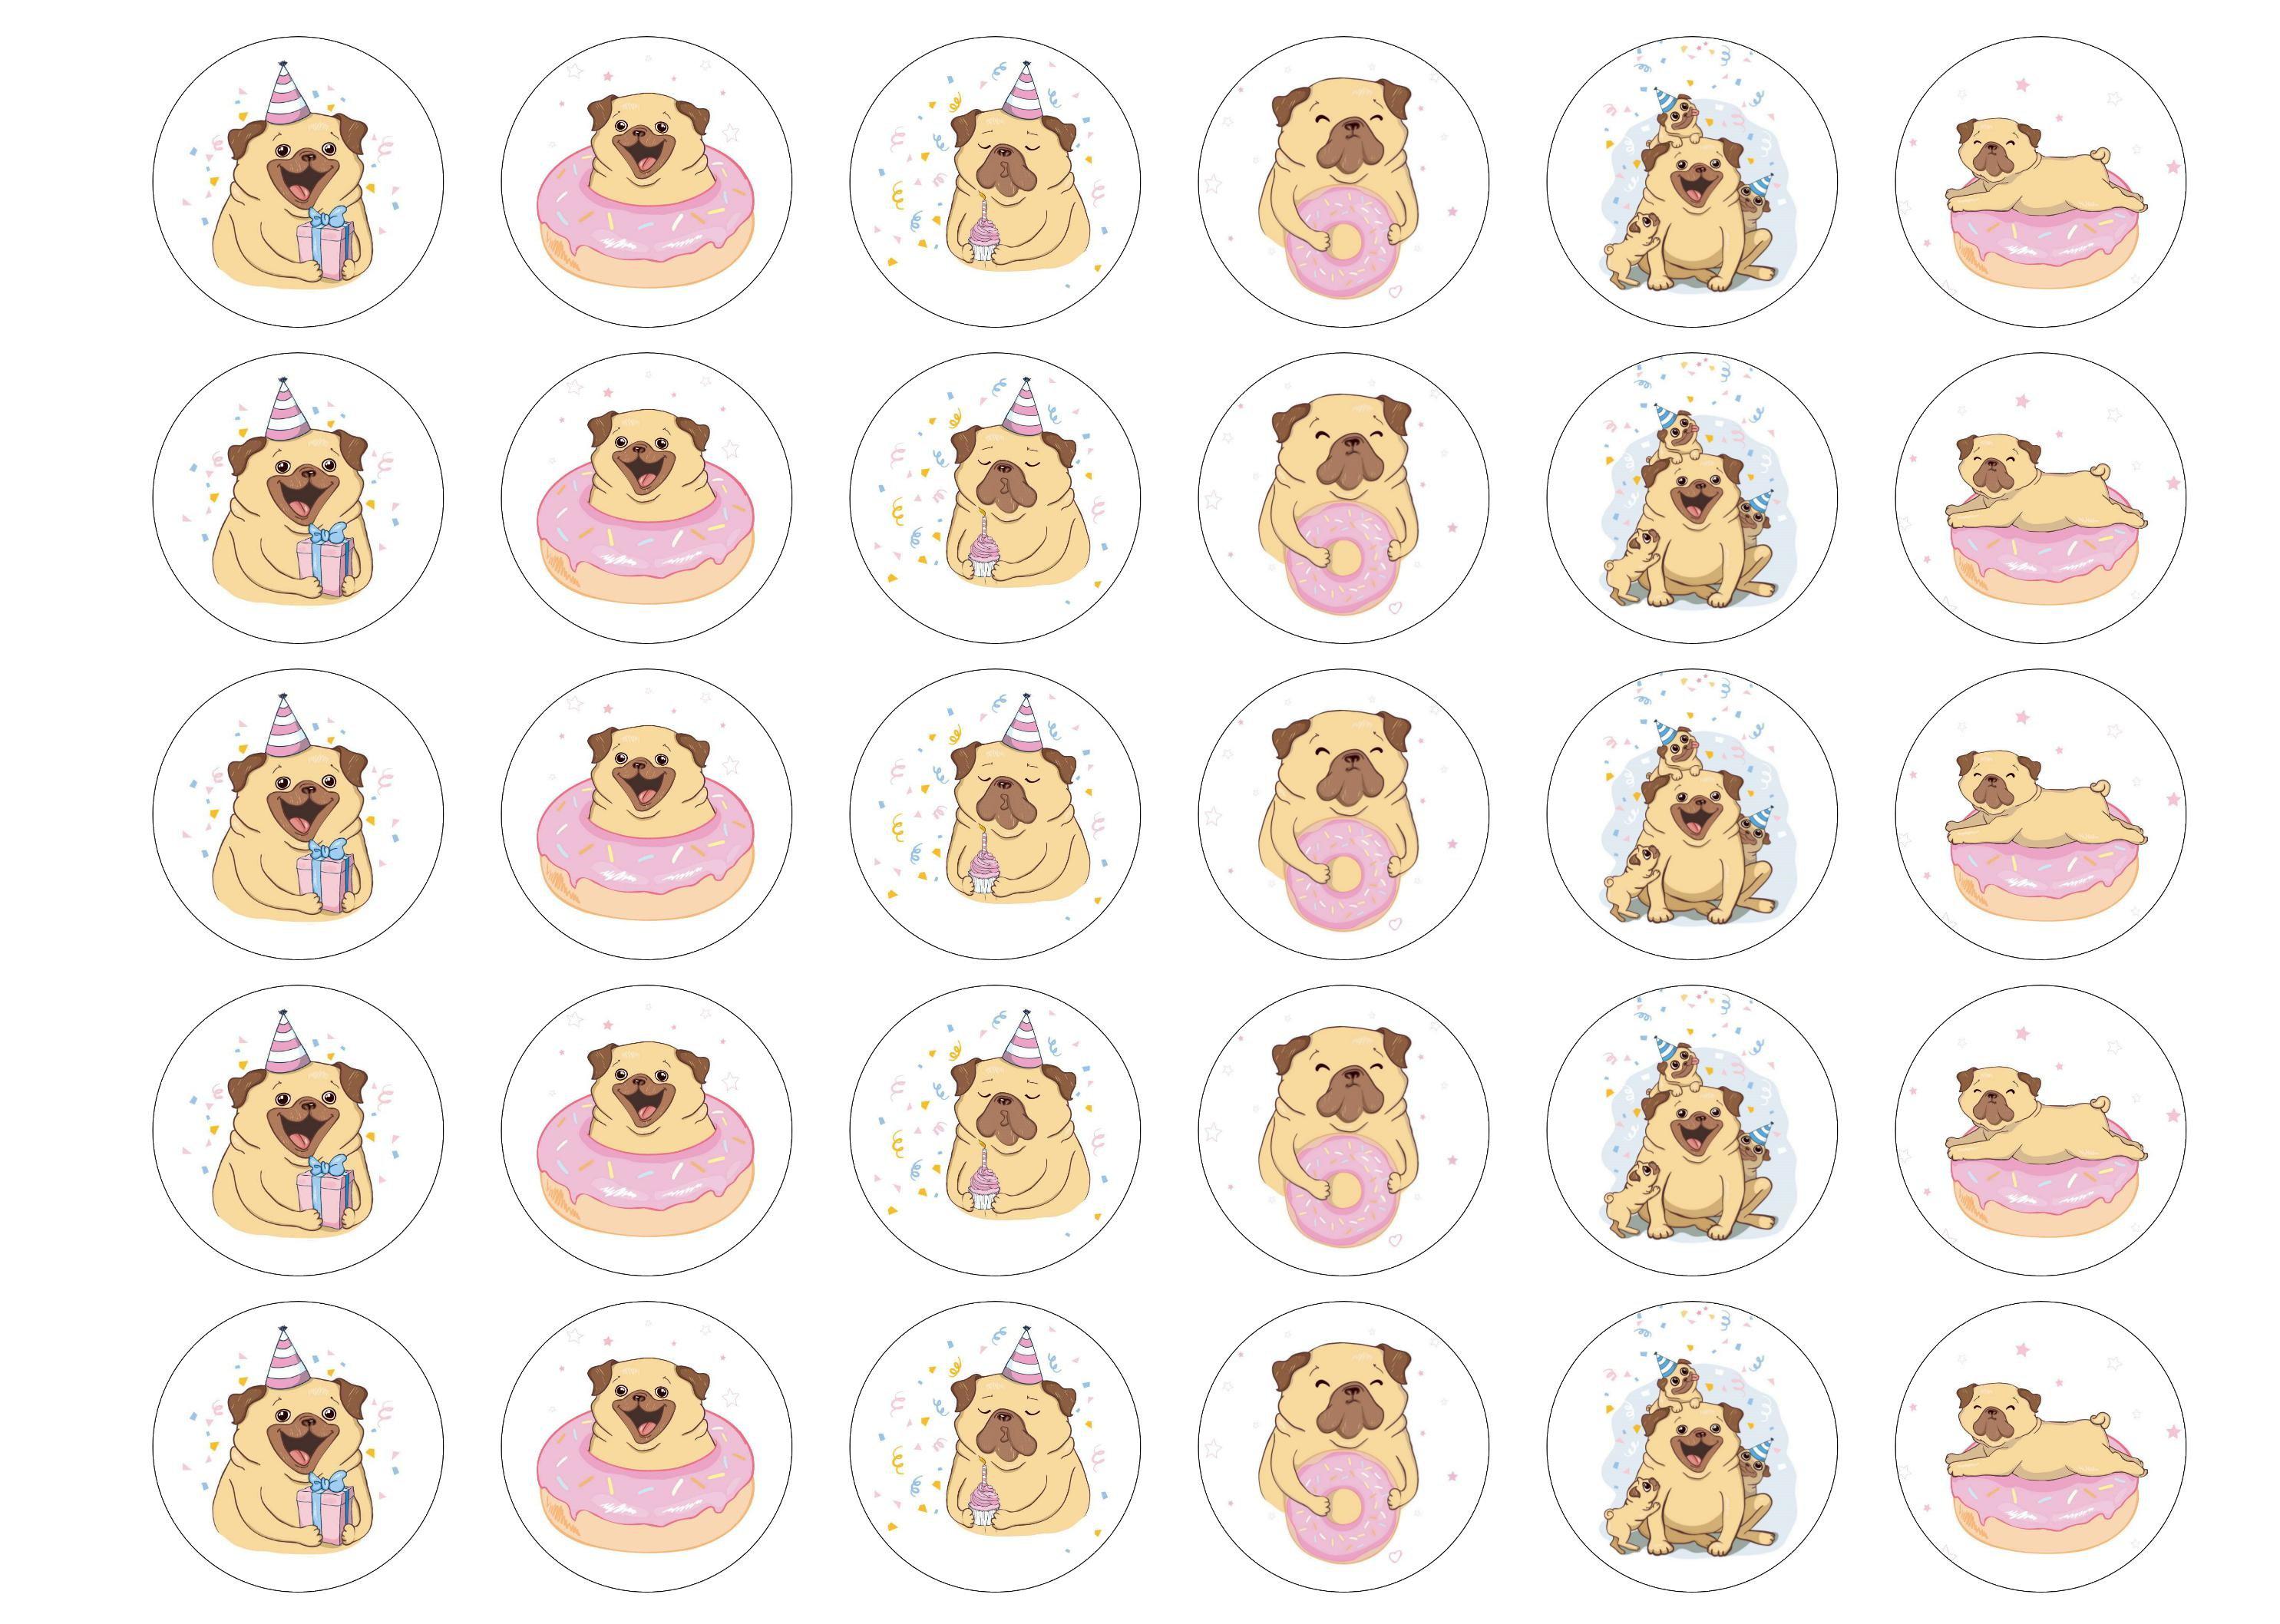 30 edible cupcake toppers printed with birthday pugs